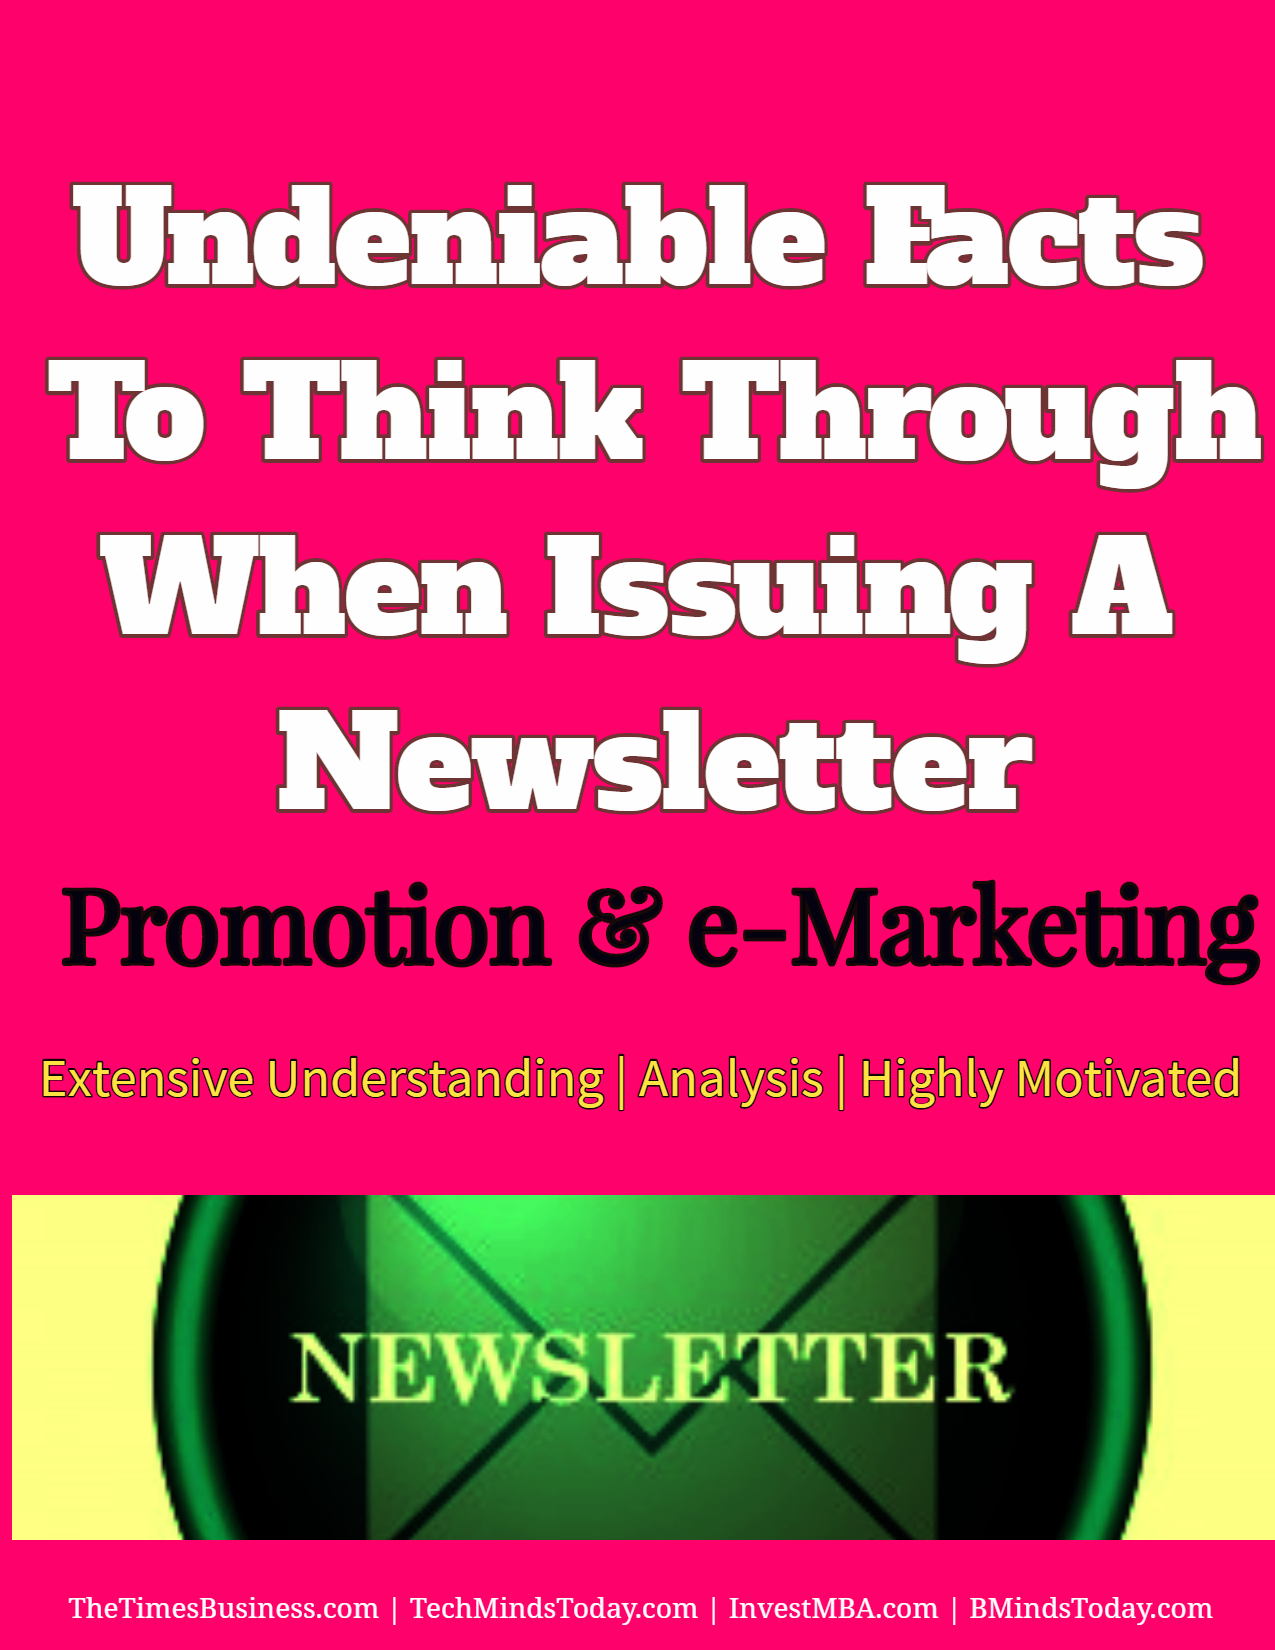 Undeniable Facts To Think Through When Issuing A Newsletter